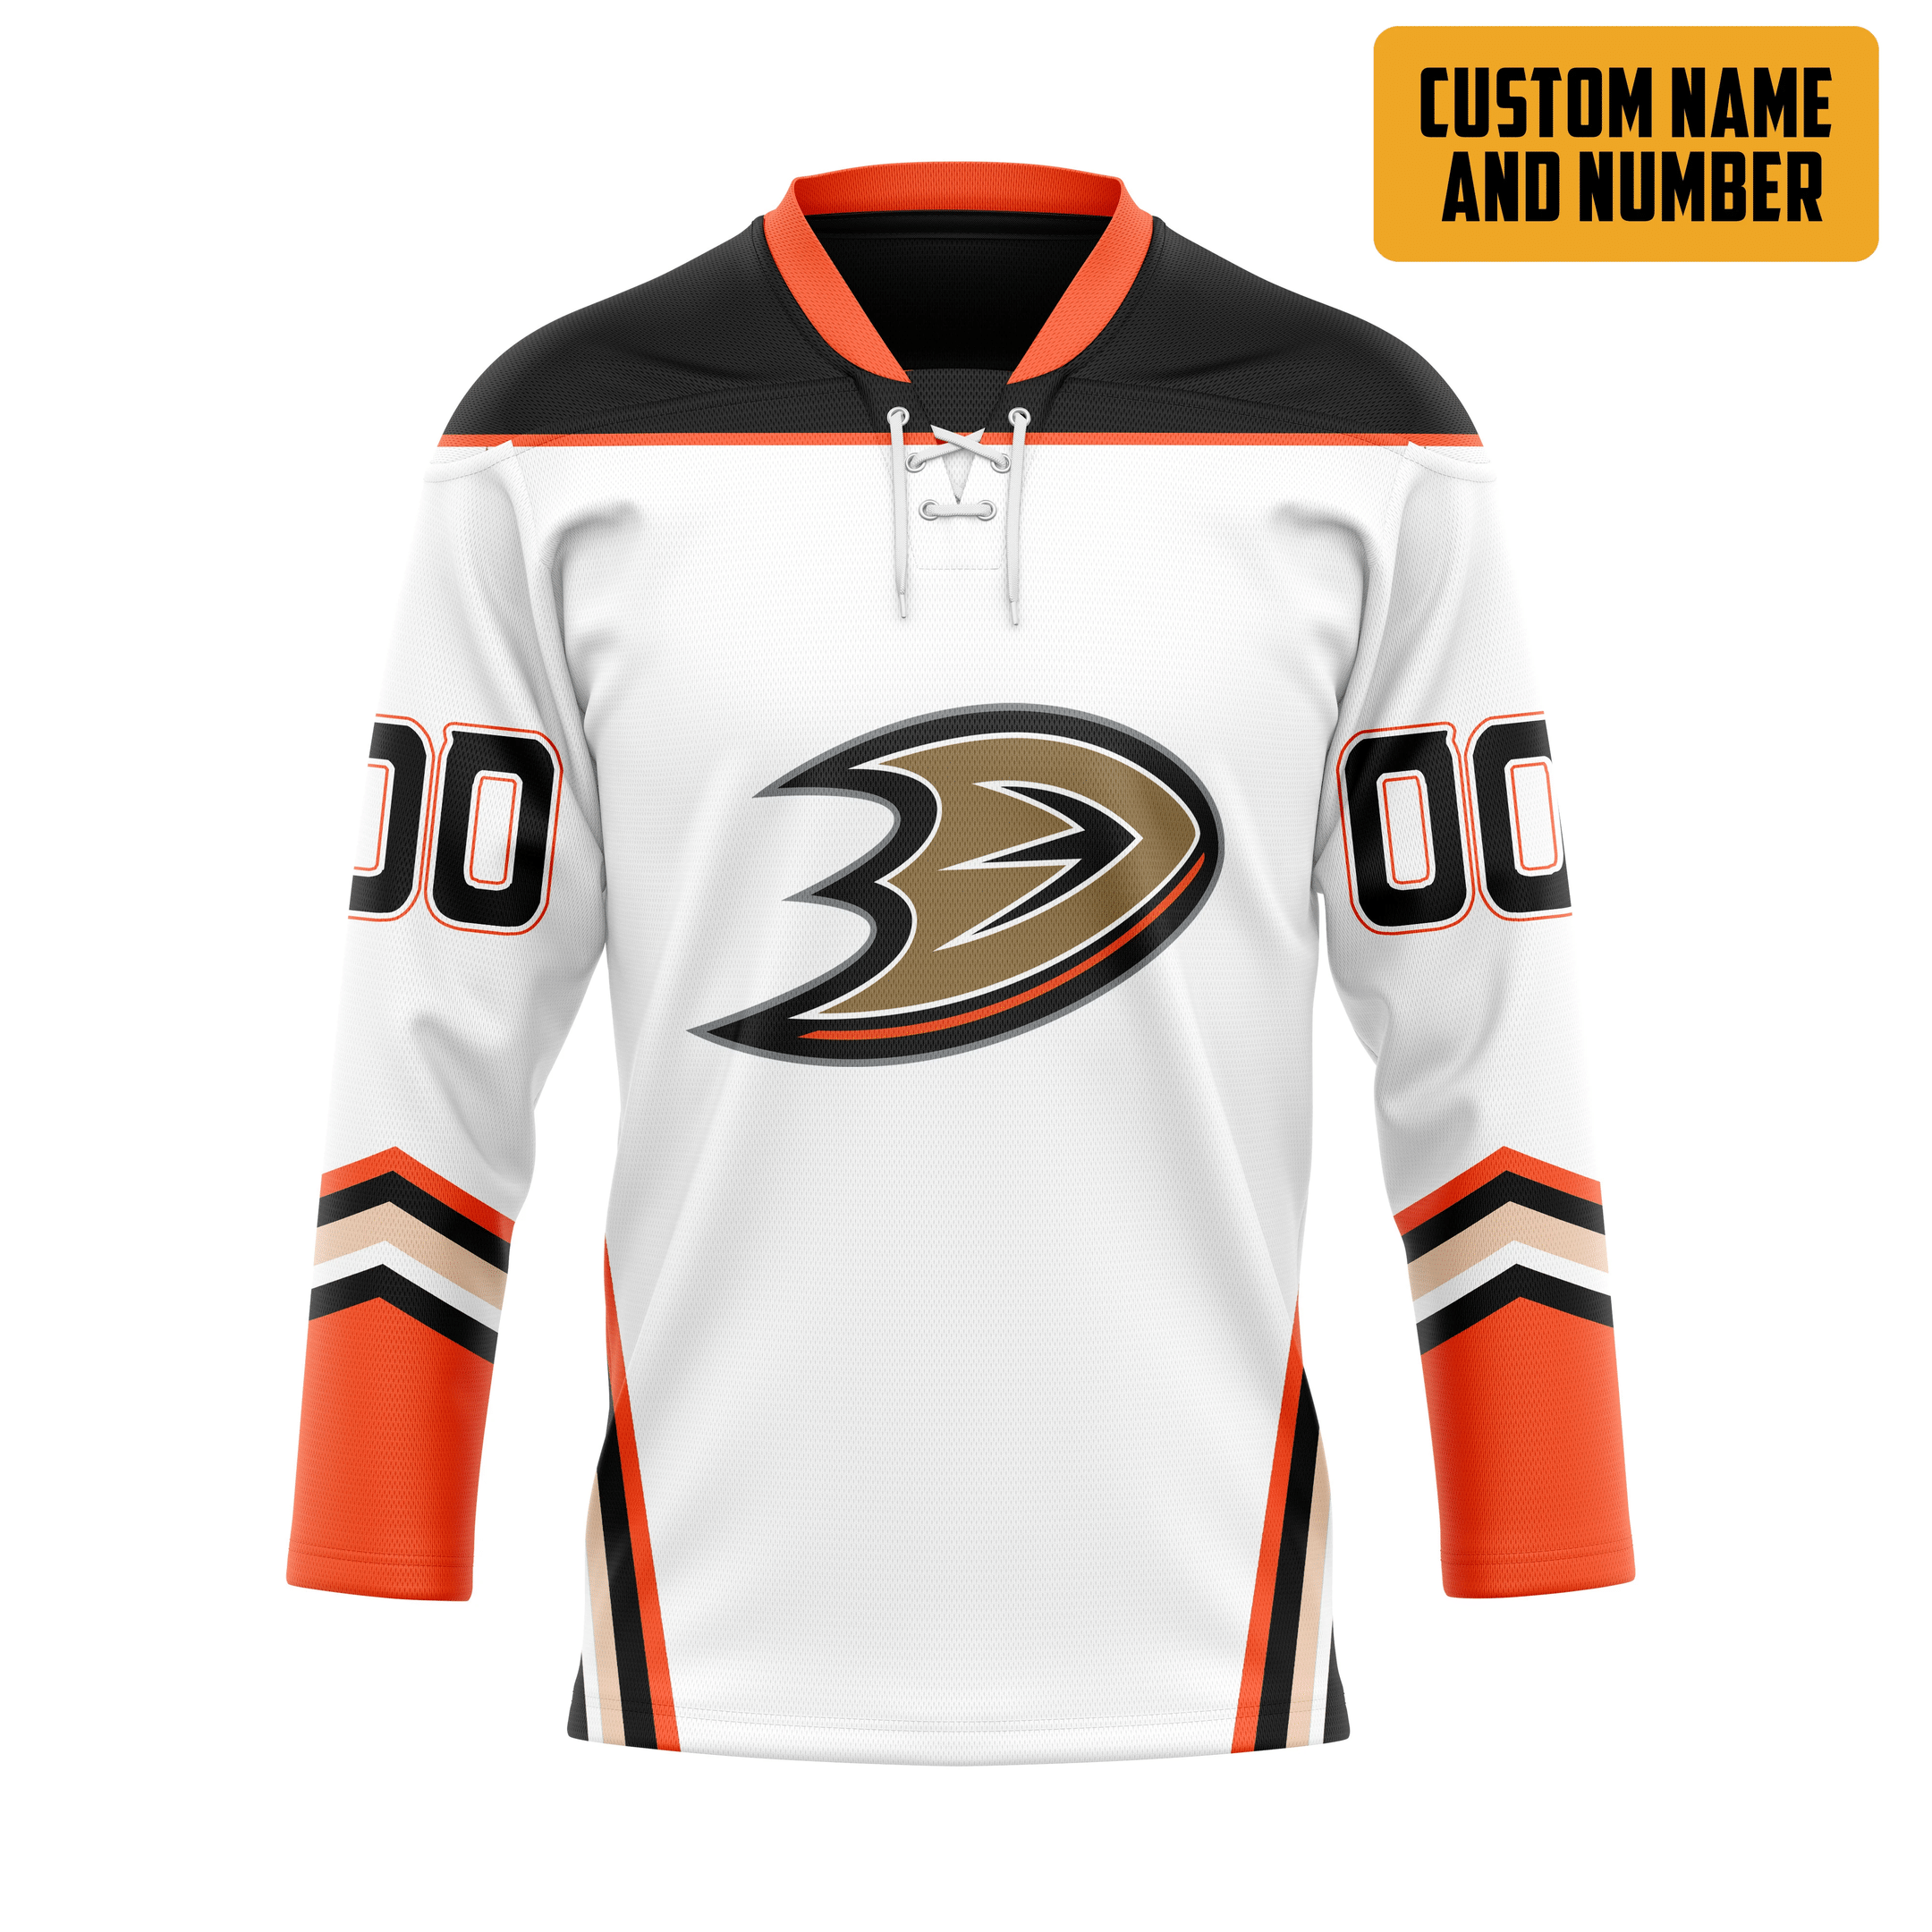 Top cool Hockey jersey for fan You can buy online. 2